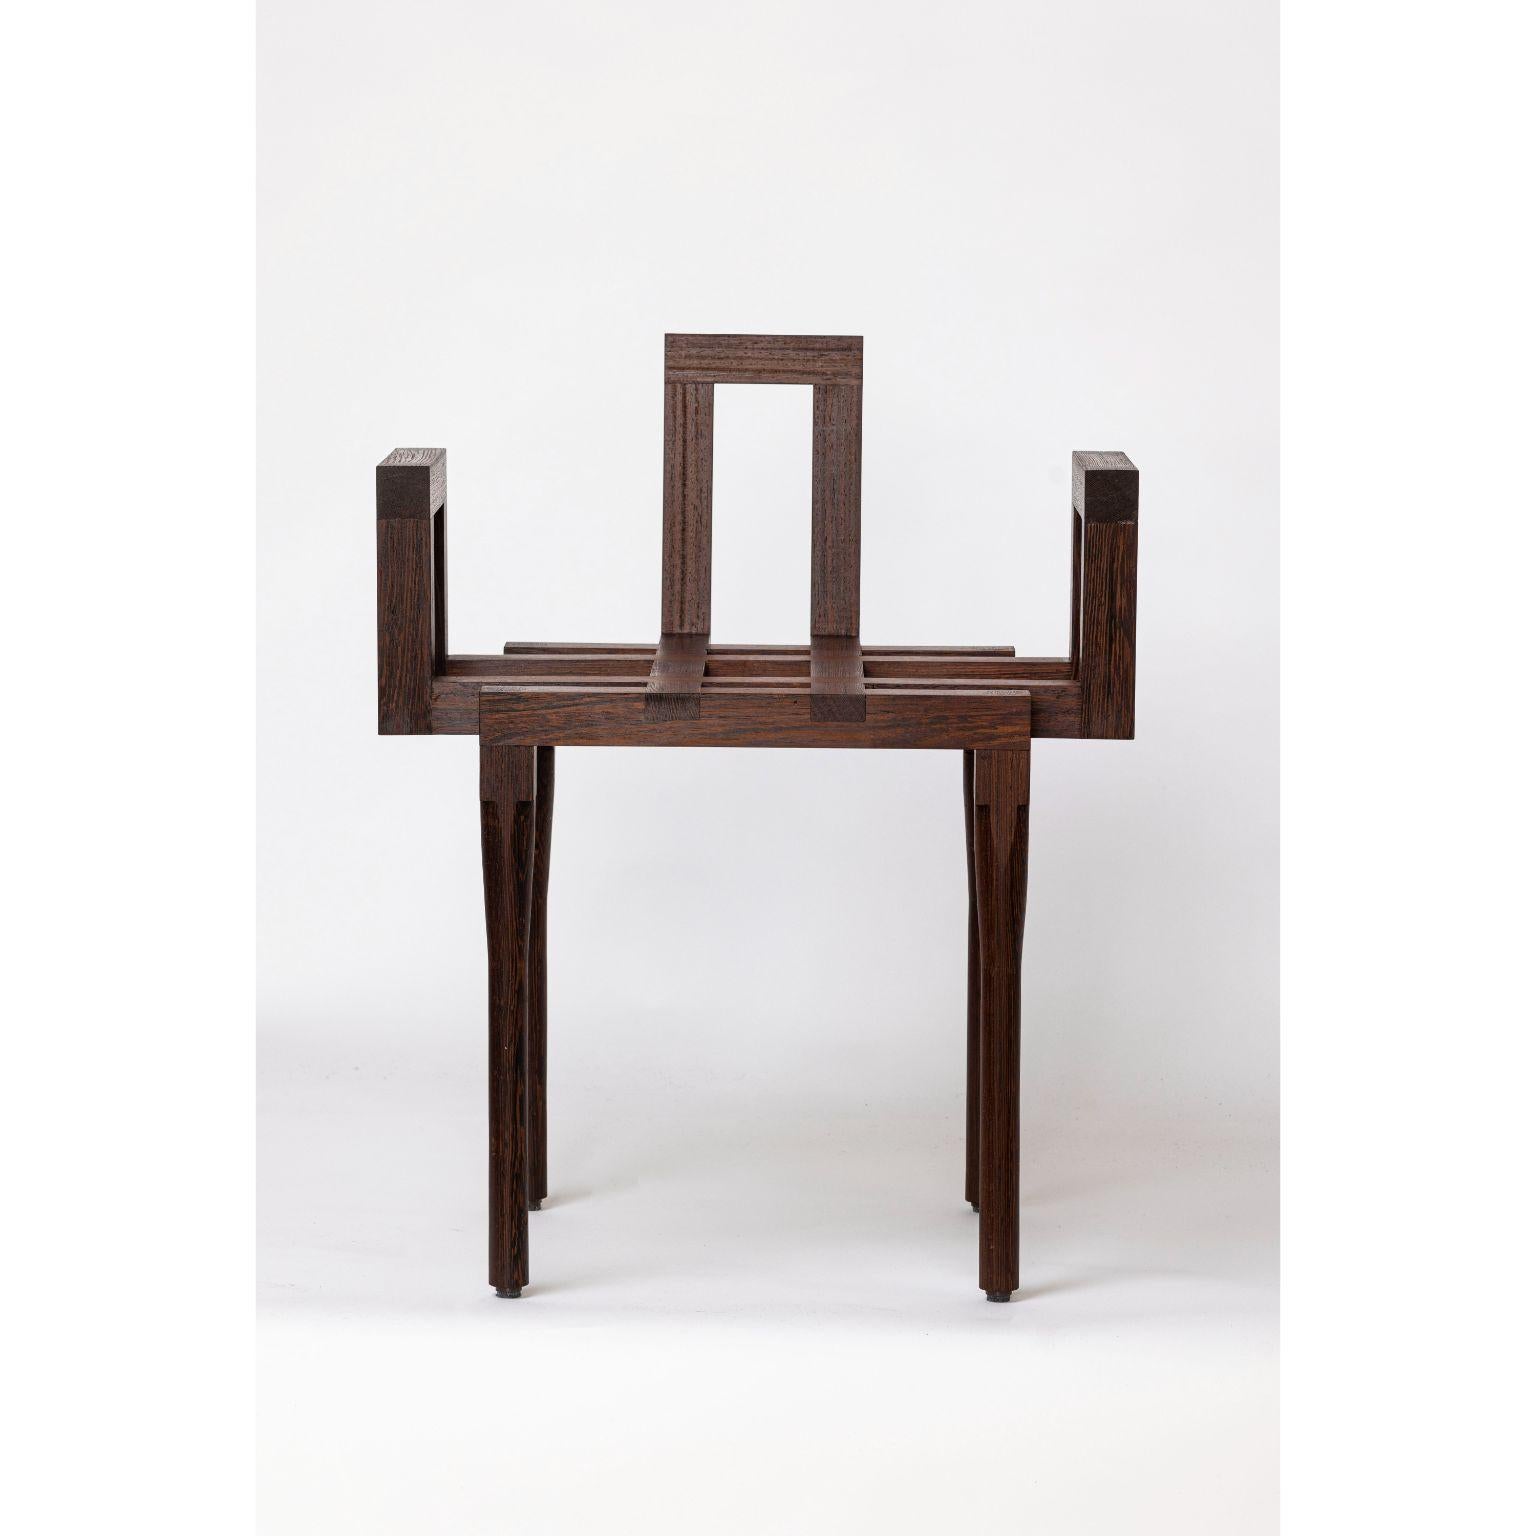 Values comfort chair by Geke Lensink
Dimensions: D 42.5 x W 49.5 x H 69 cm 
Materials: wenge wood 

After graduating from ArtEZ University of the Arts, Geke Lensink started working as an independent interior designer, setting up many exhibitions